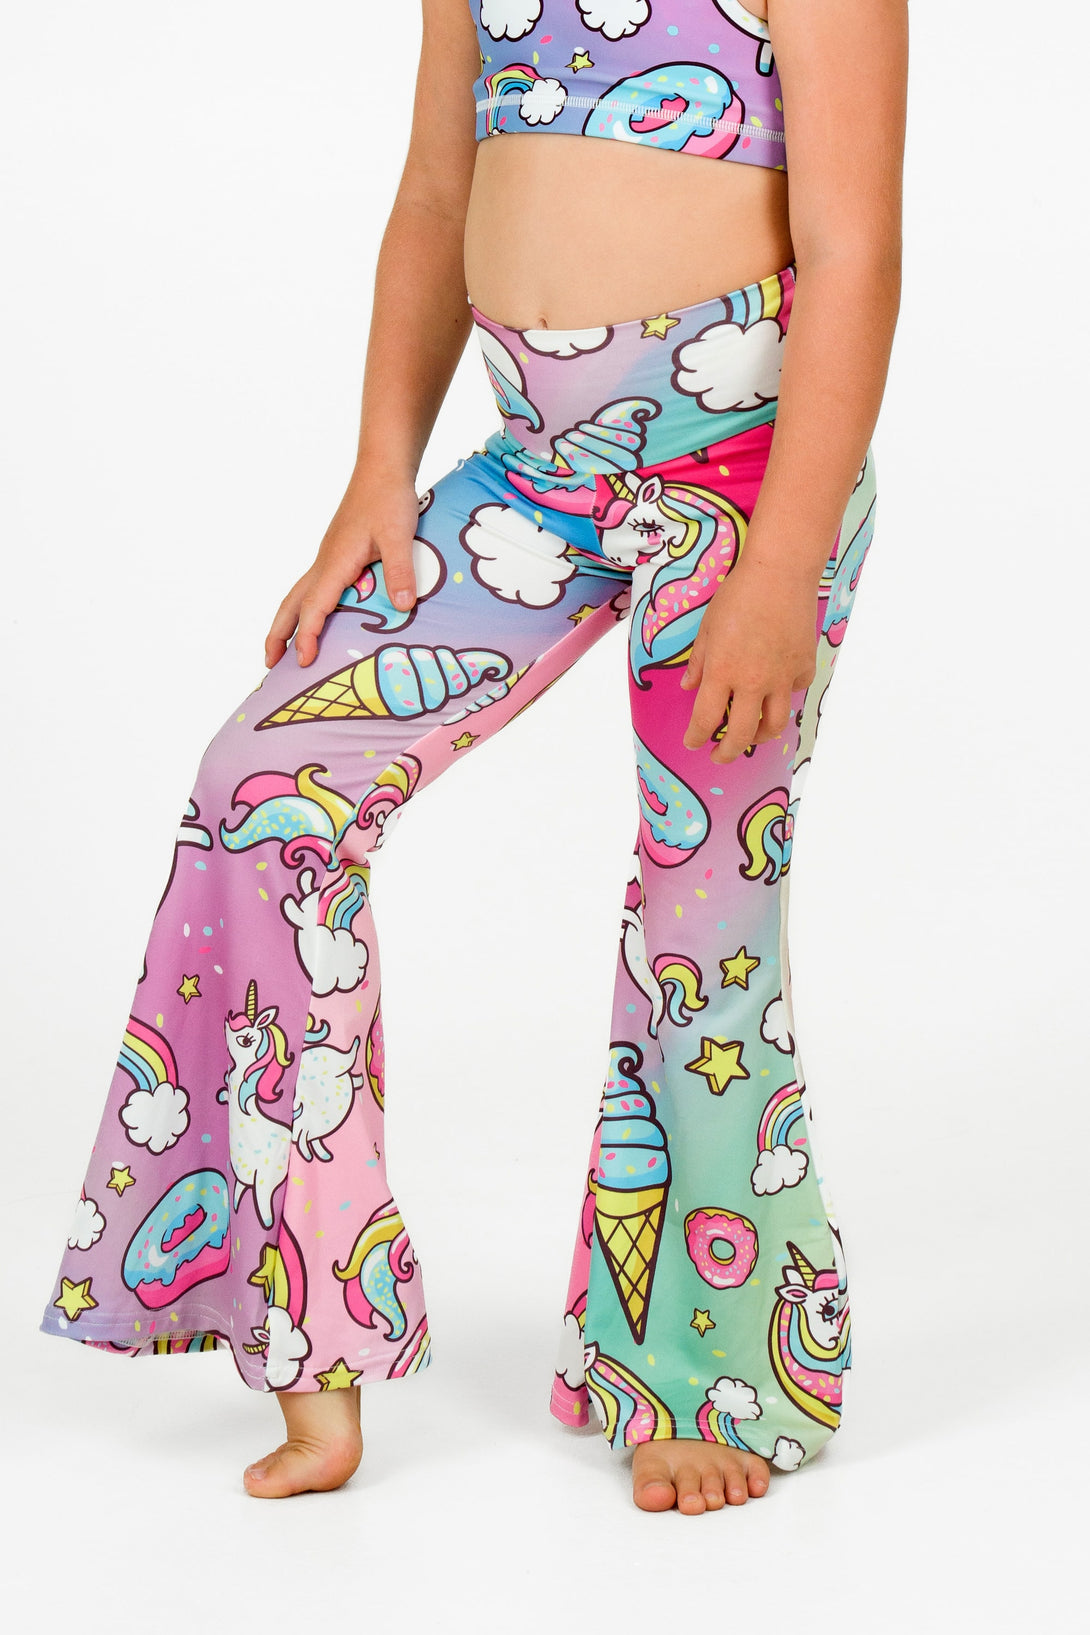 Young girl wearing activewear and loungewear from exotica athletica in a unicorn print bell leg pants